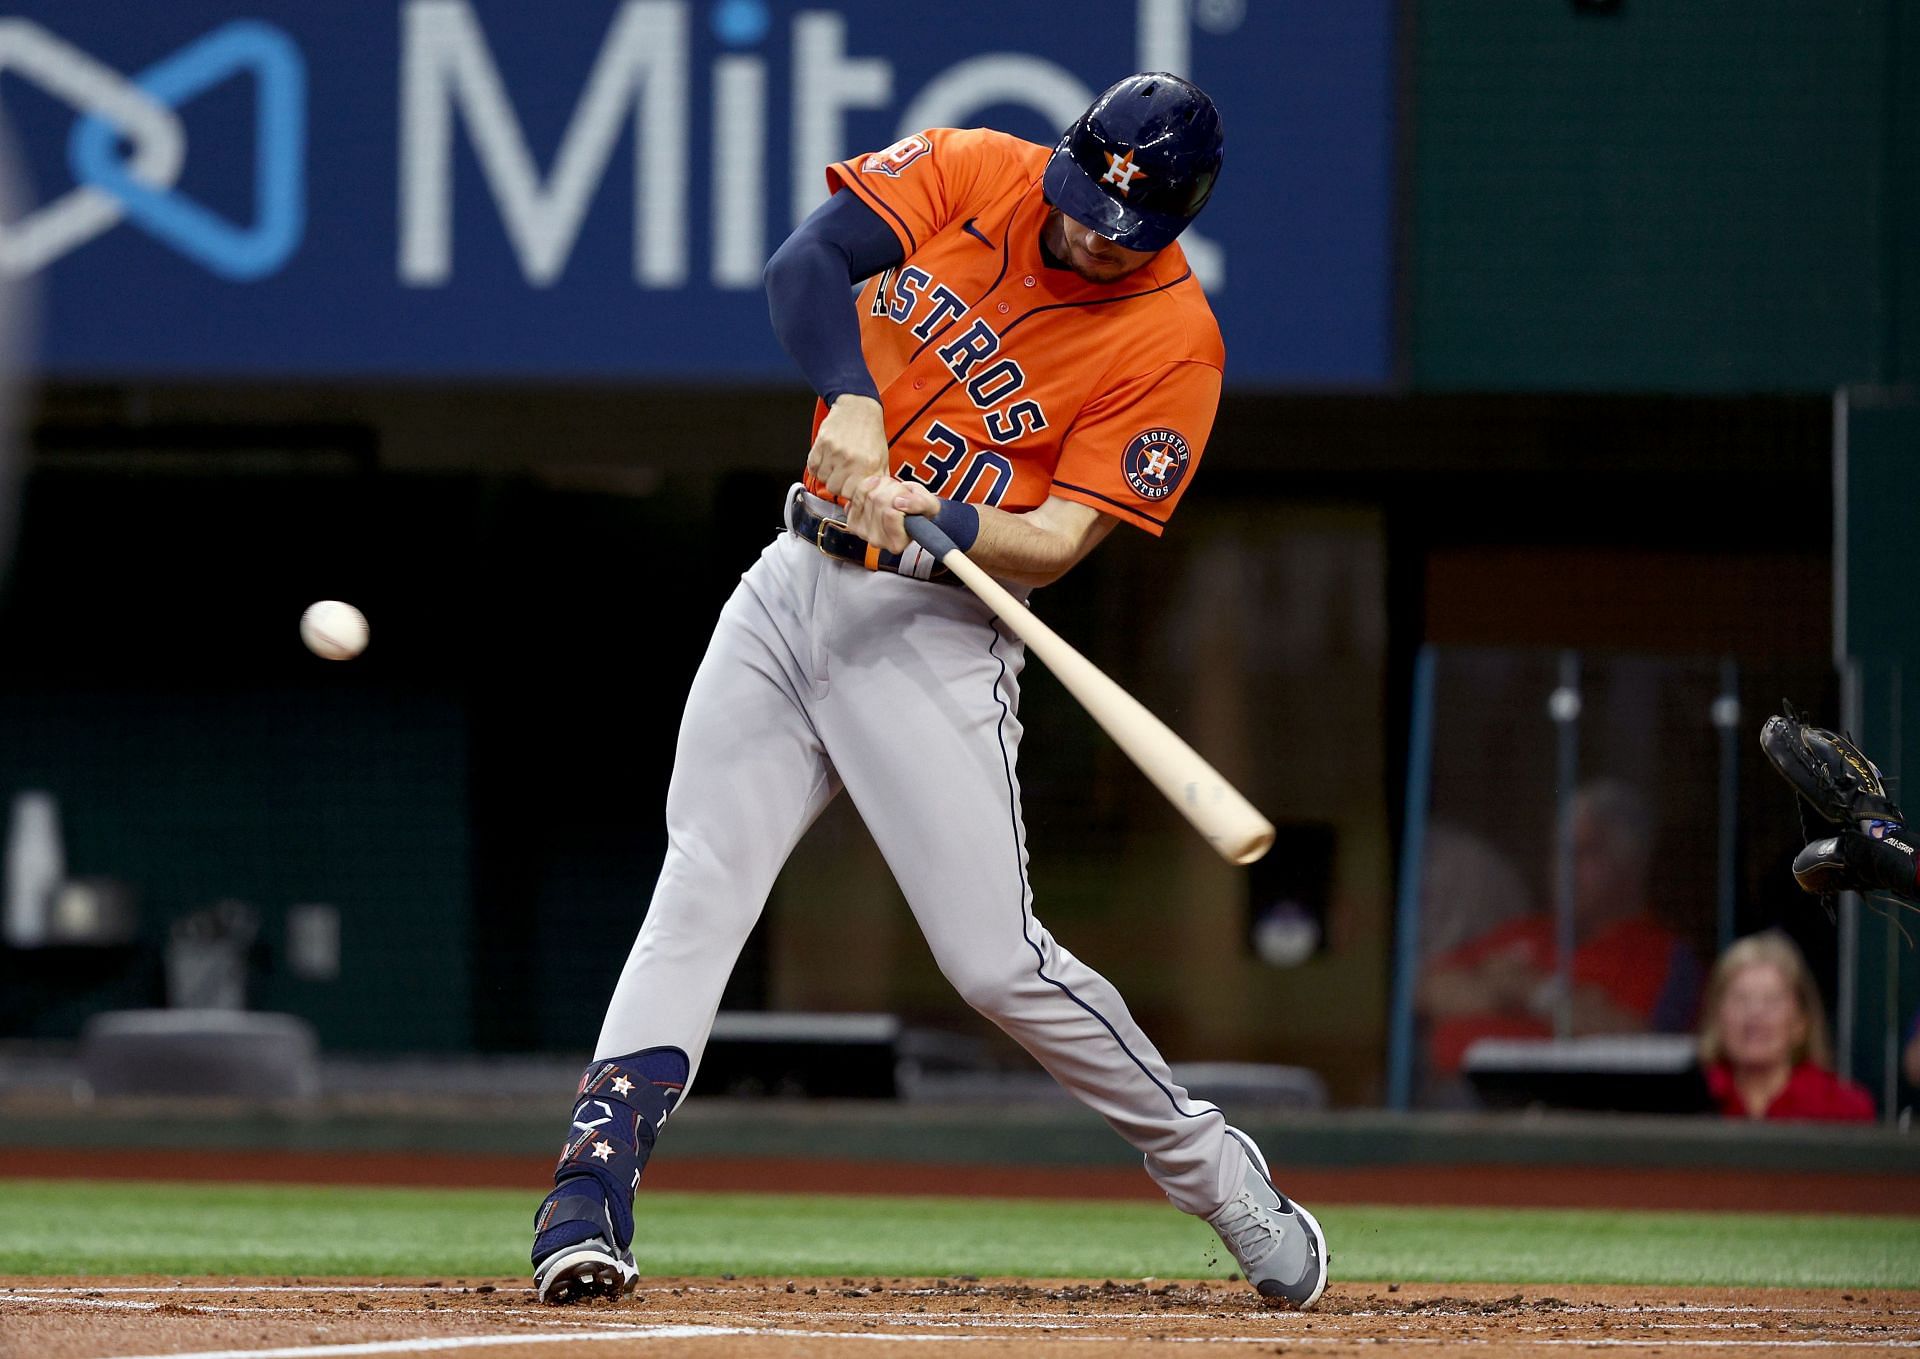 Houston Astros outfielder Kyle Tucker is coming alive at the plate